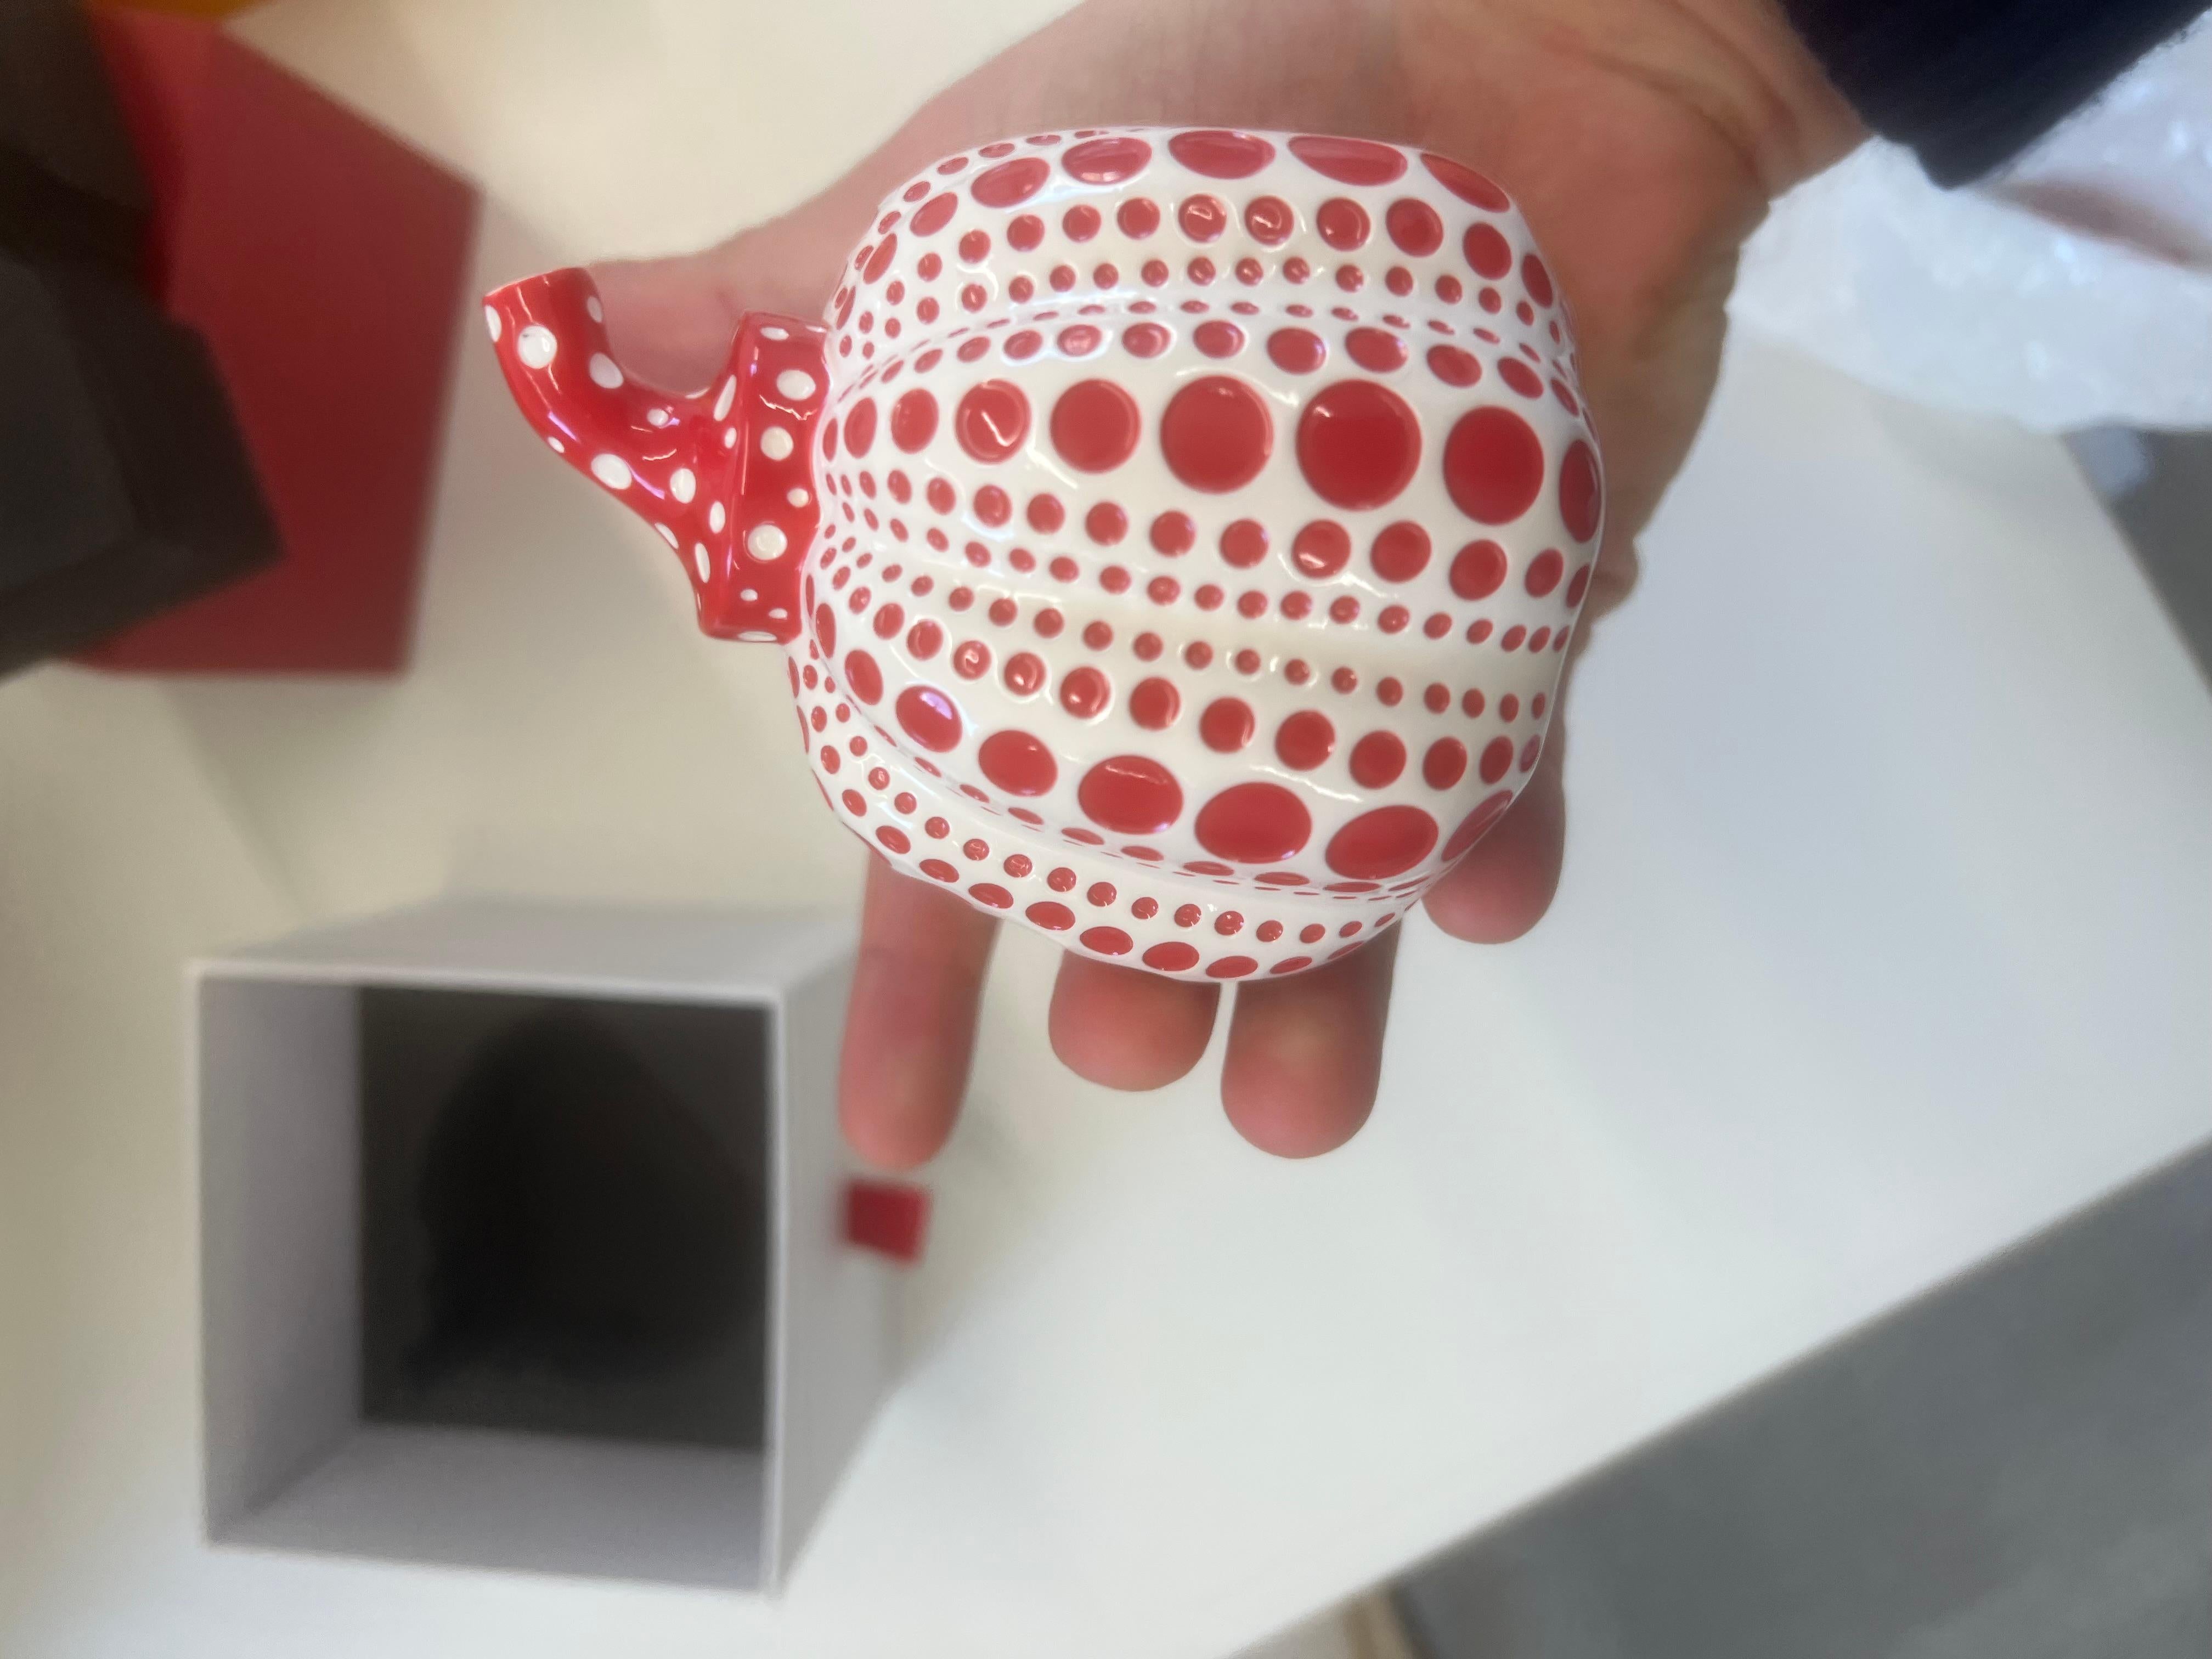 Yayoi Kusama, Pumpkin Cast Resin Figure in Red, 2015

Lacquer-painted cast resin figure.
Stamped with the artist’s name on the underside.
Comes in the original box, never opened.
W7.6 x D7.6 x H10.2 cm
